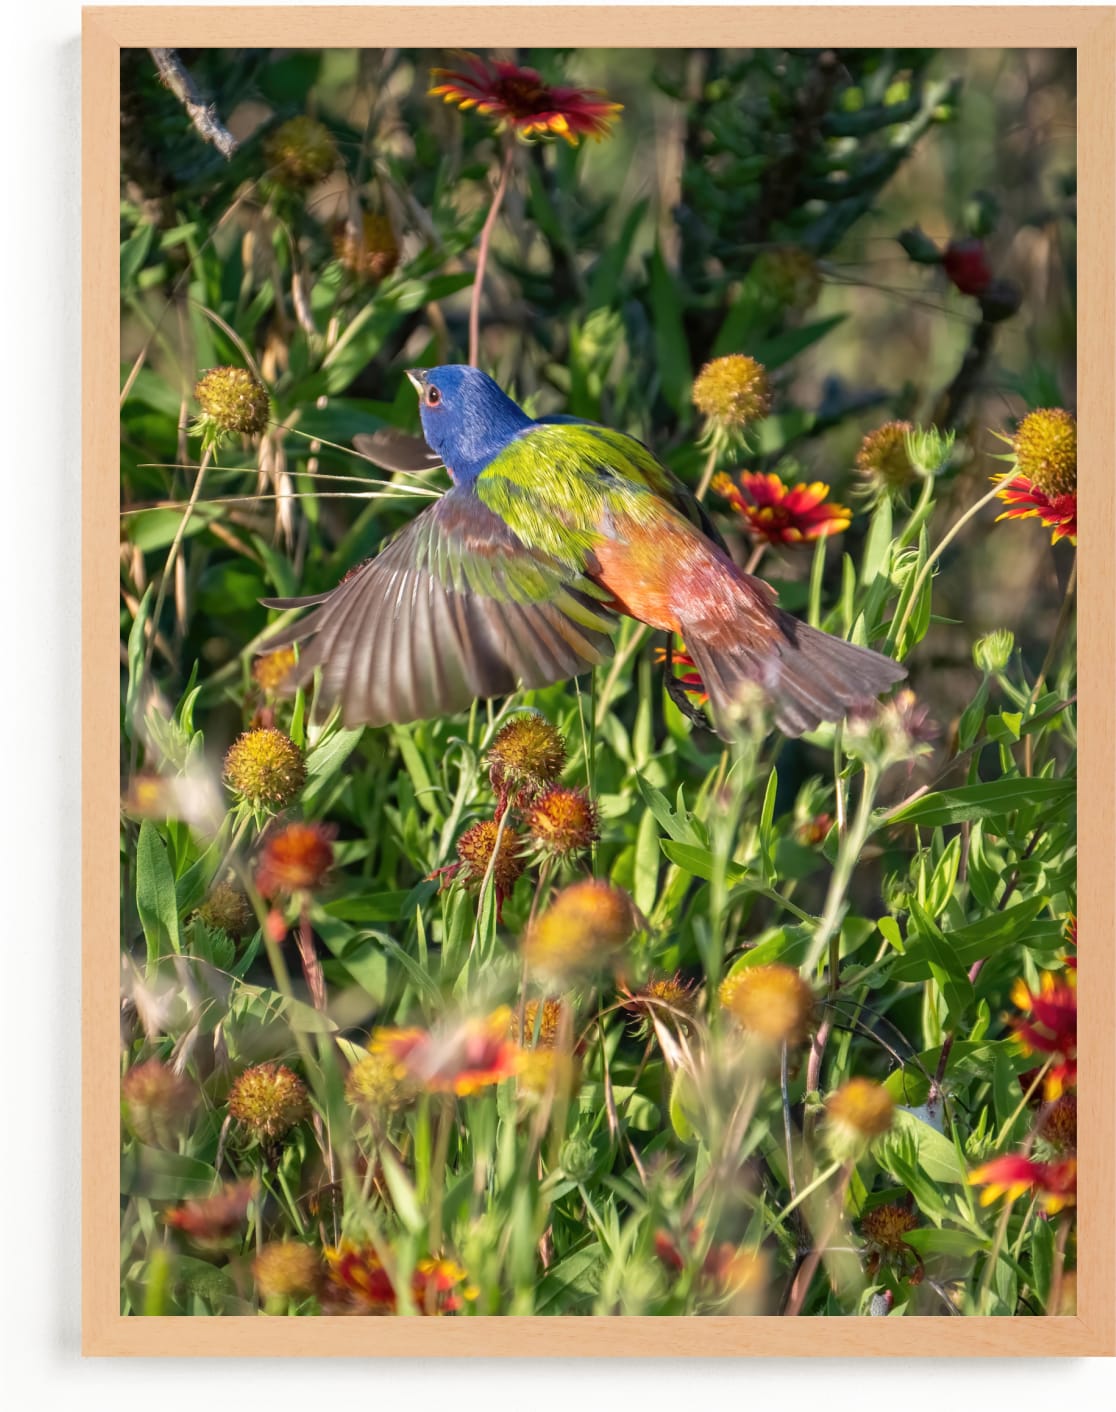 This is a yellow art by Aaric Eisenstein called Painted Bunting : The Light In This Moment.